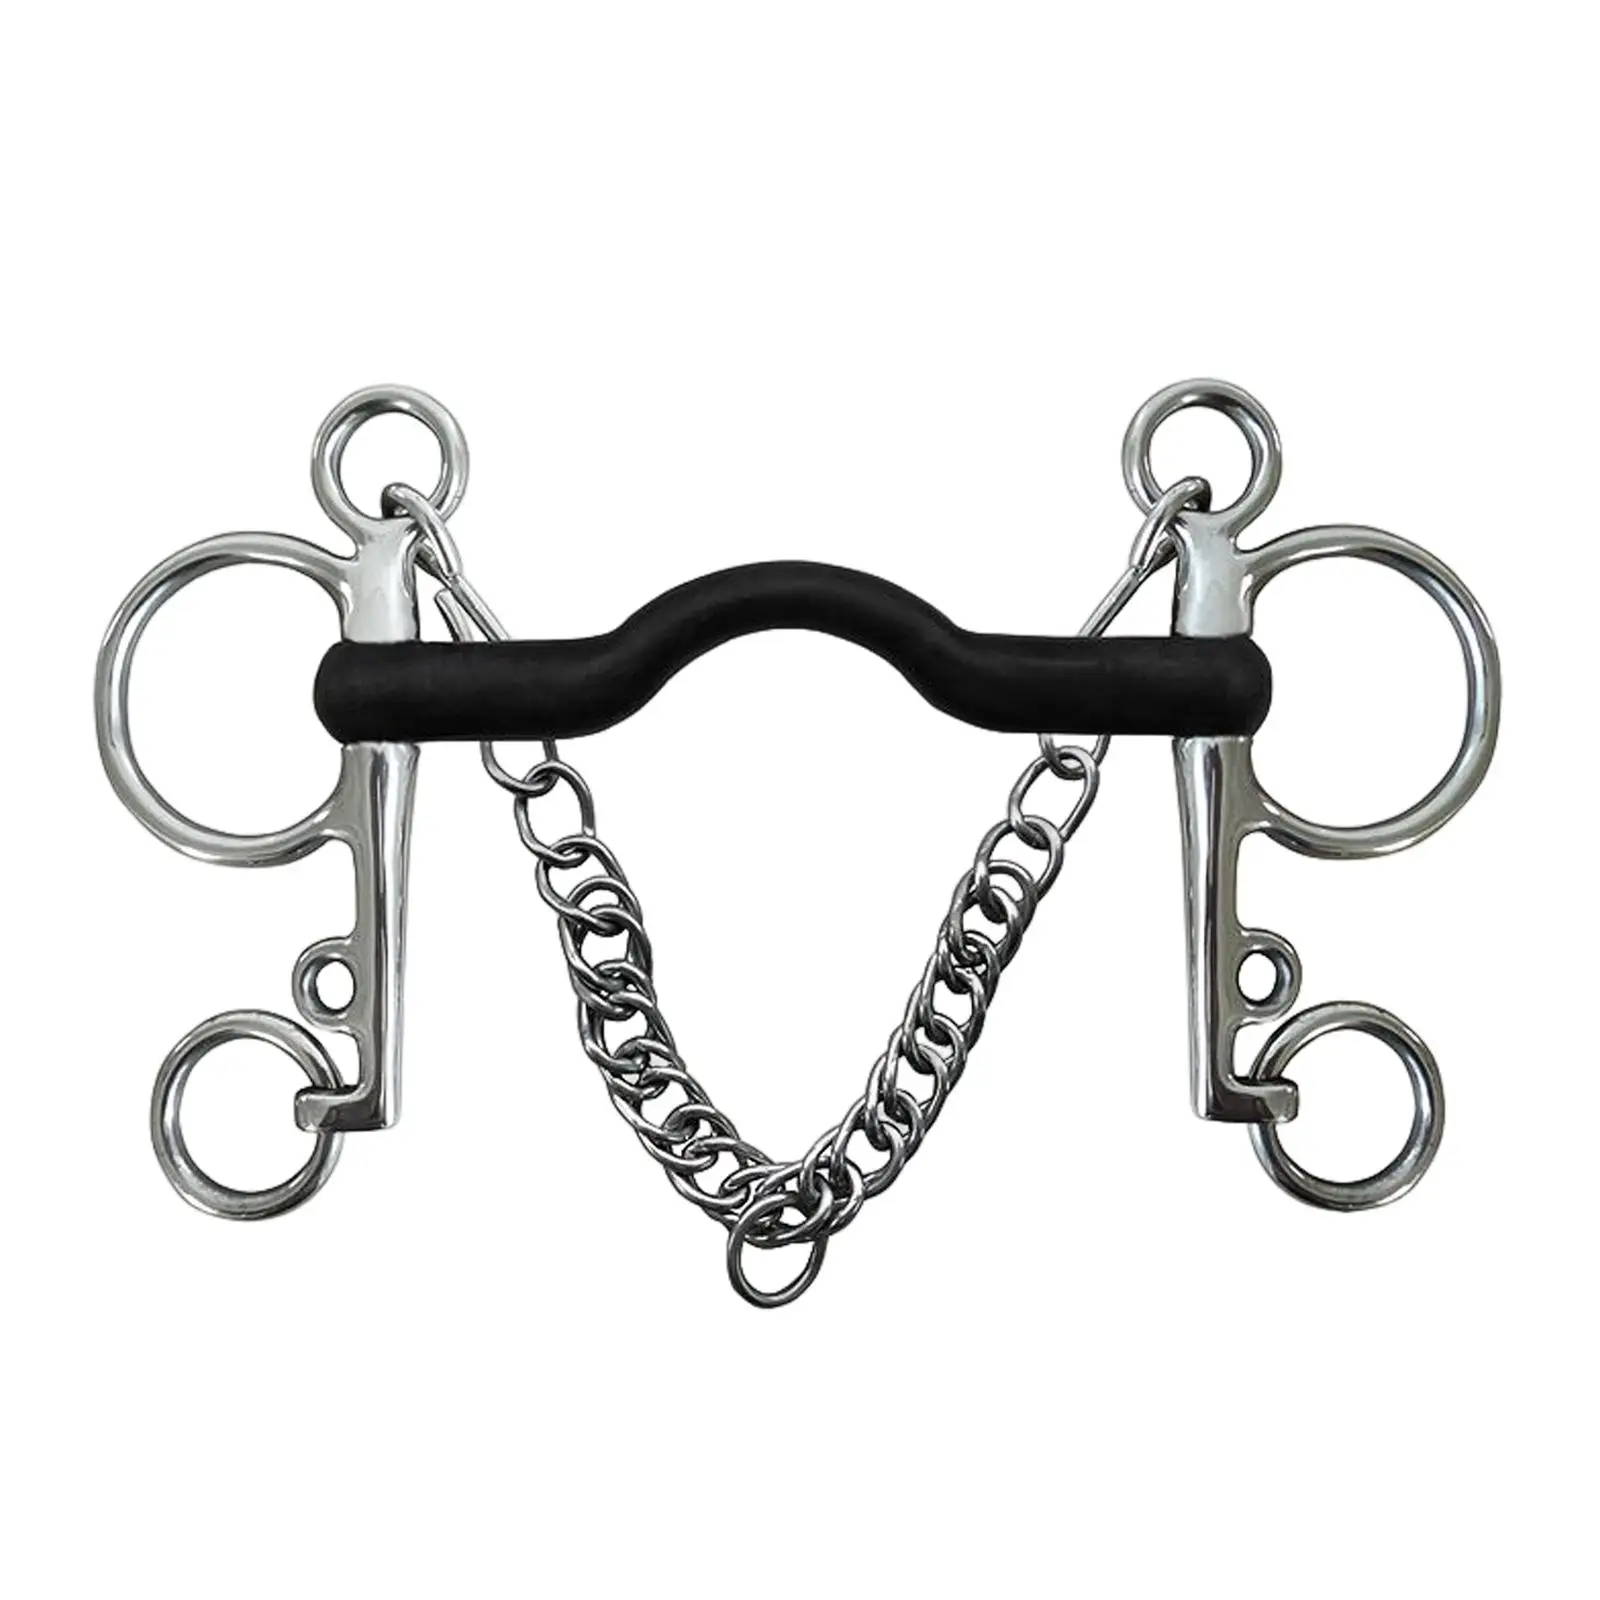 Western Style Horse Bit, Mouth Horse Gag Bit, W/Curb Hooks Chain, Stainless Steel Harness, Cheek for Performance Equestrian